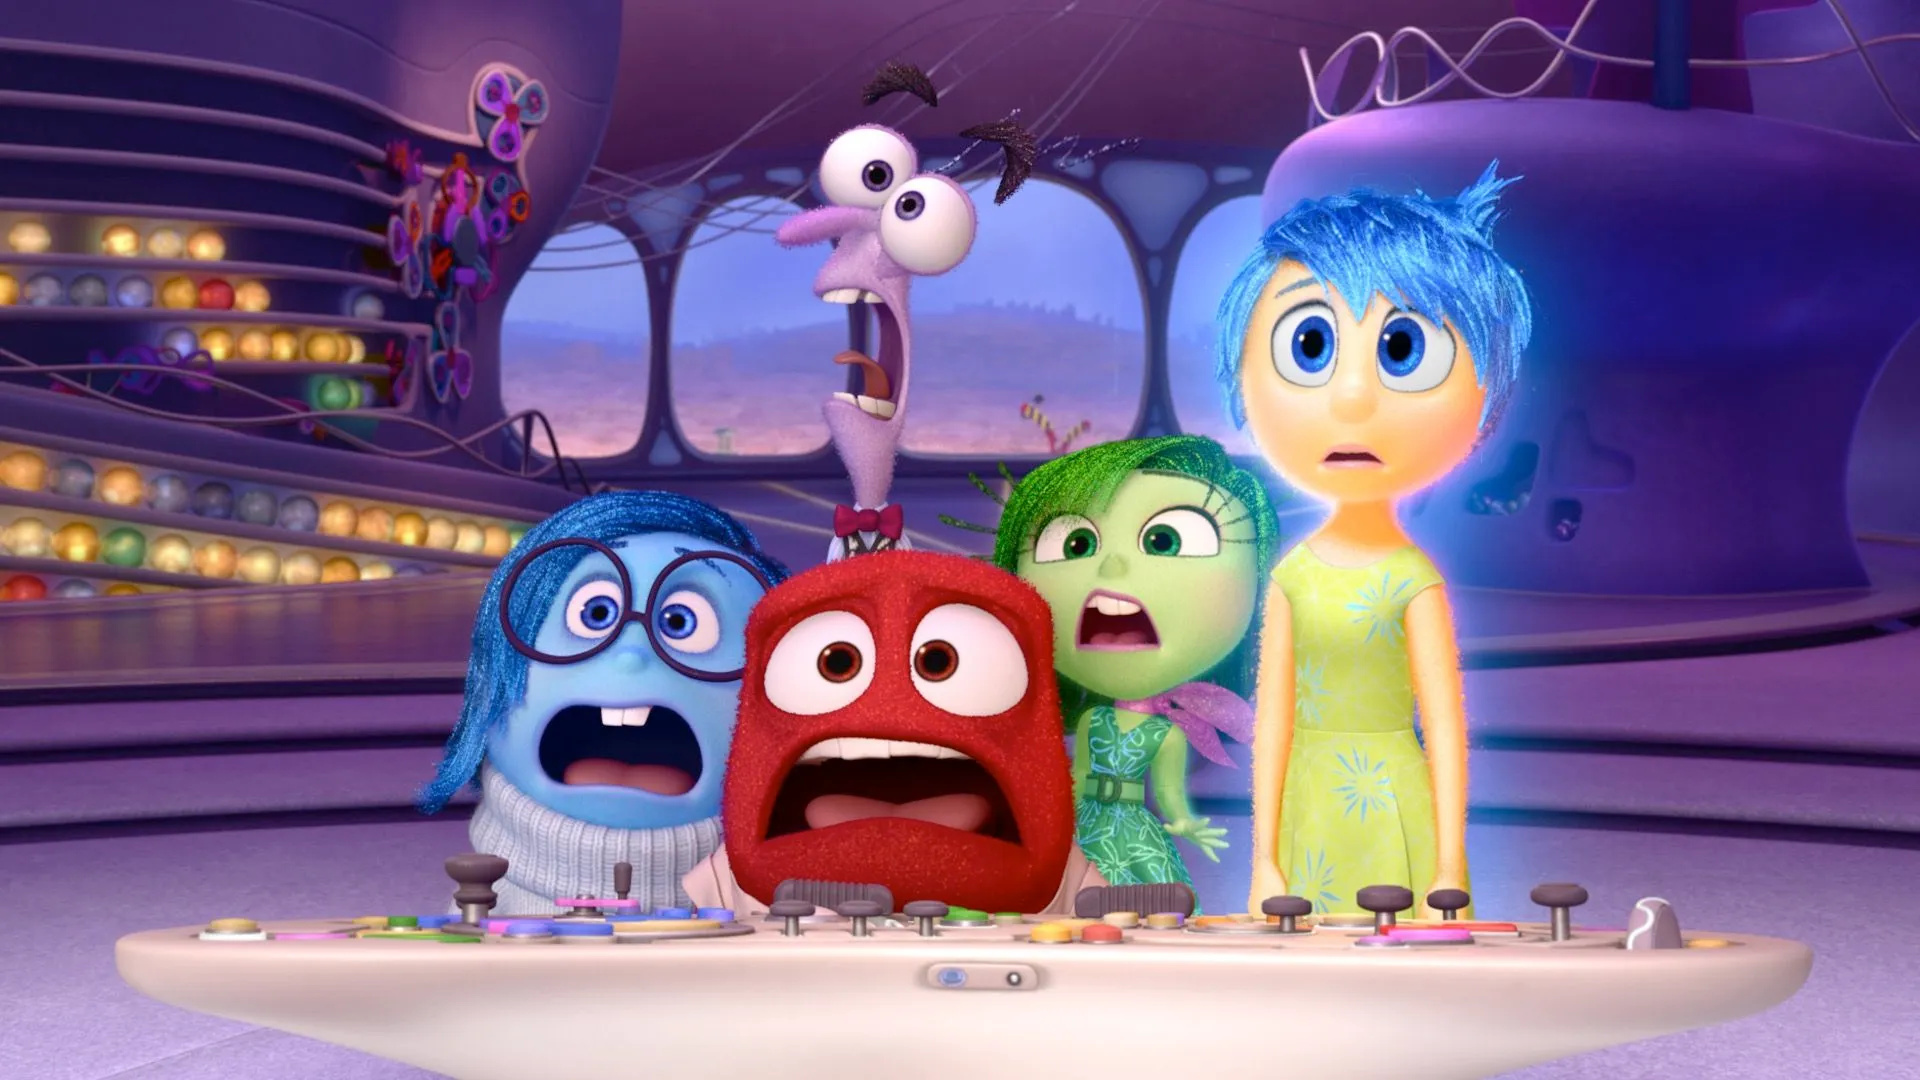 Pixar's Inside Out, Lessons on emotions, Mindful experience, Animated film, 1920x1080 Full HD Desktop